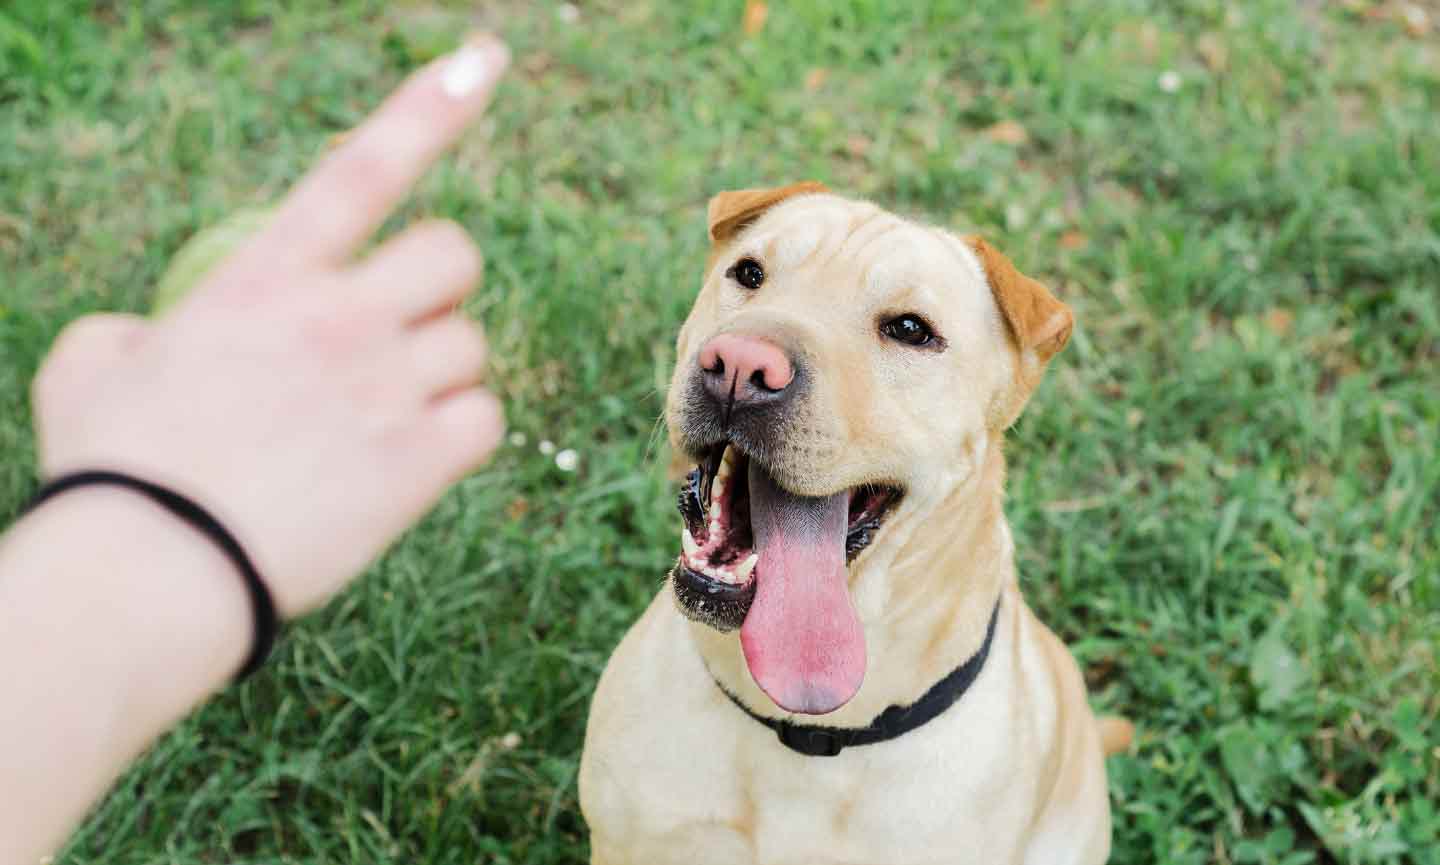 A dog sitting in the grass and looking up at a person's hand.